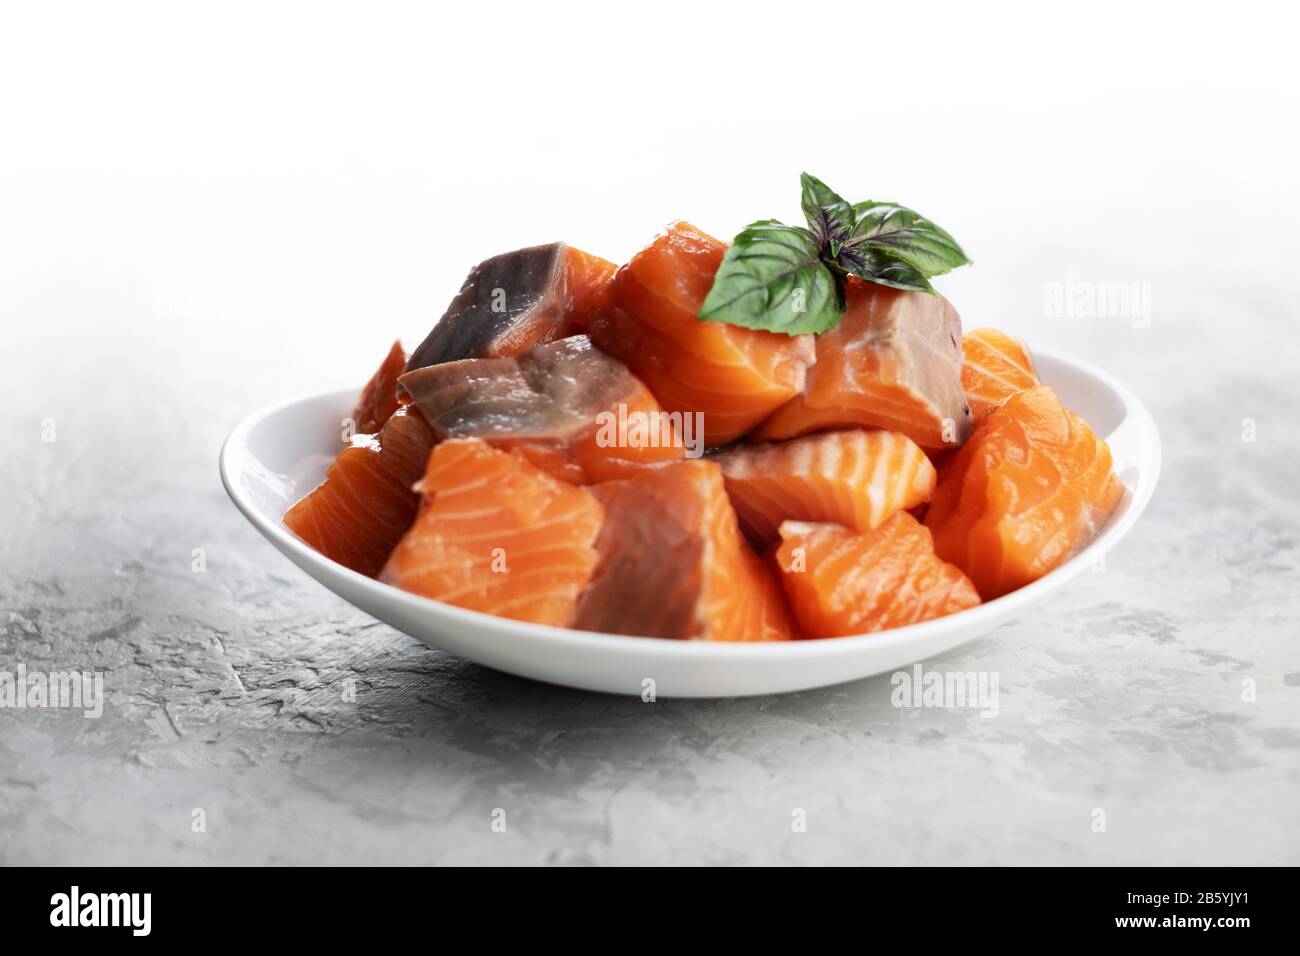 Pieces of salmon trout fillet fish in white plate closeup. Food photography Stock Photo